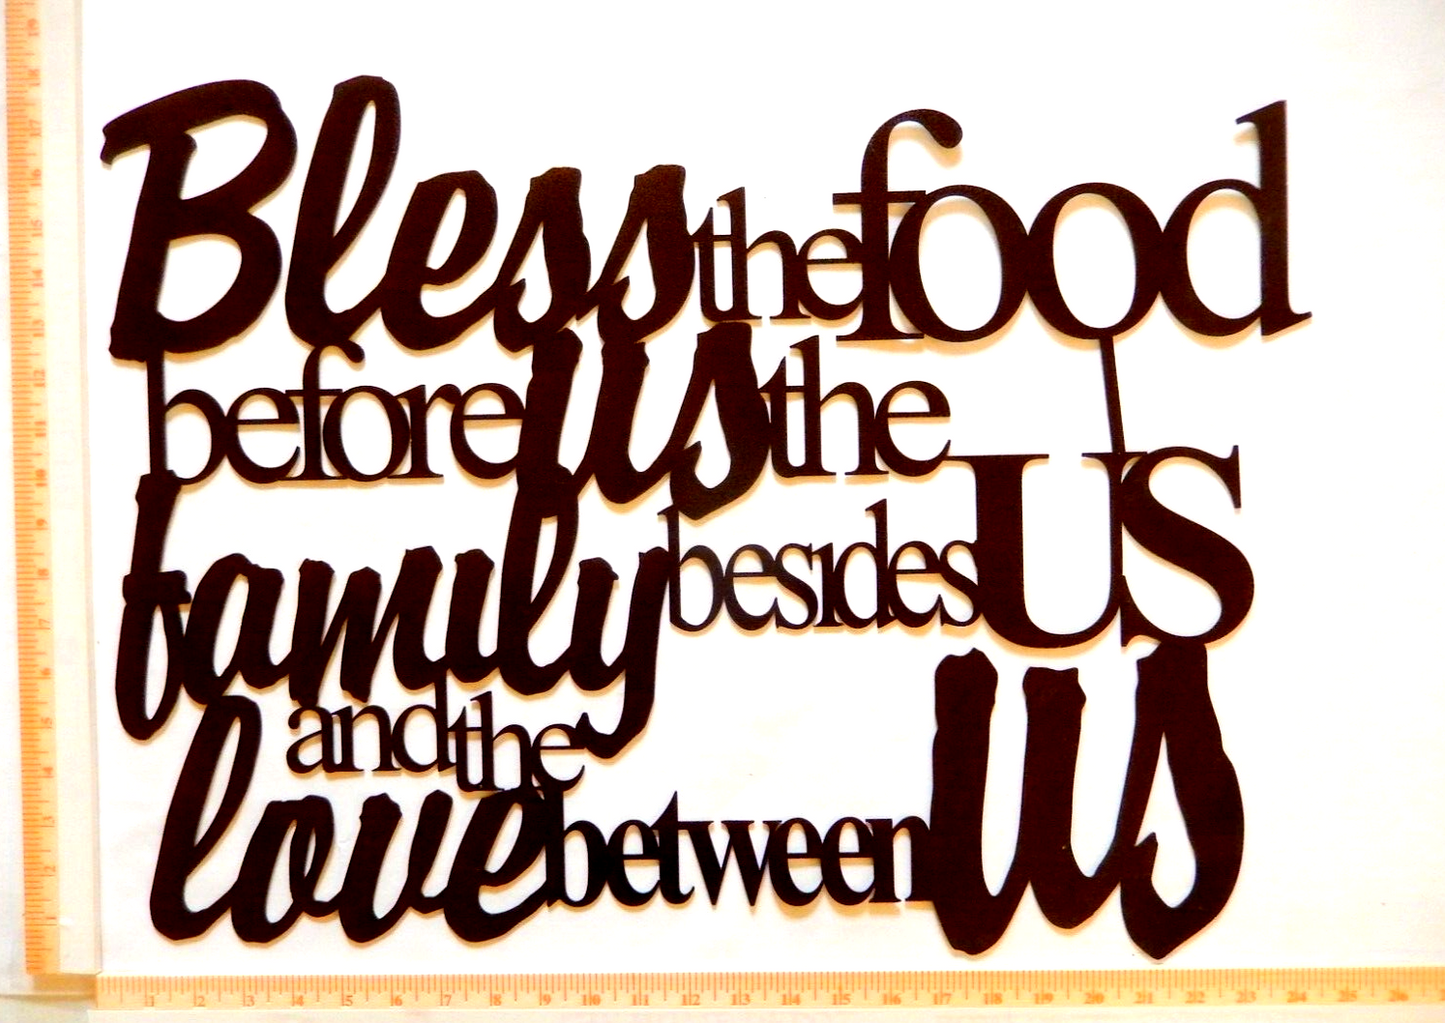 Bless The Food Before Us The Family Beside Us and The Love Between Us Sign